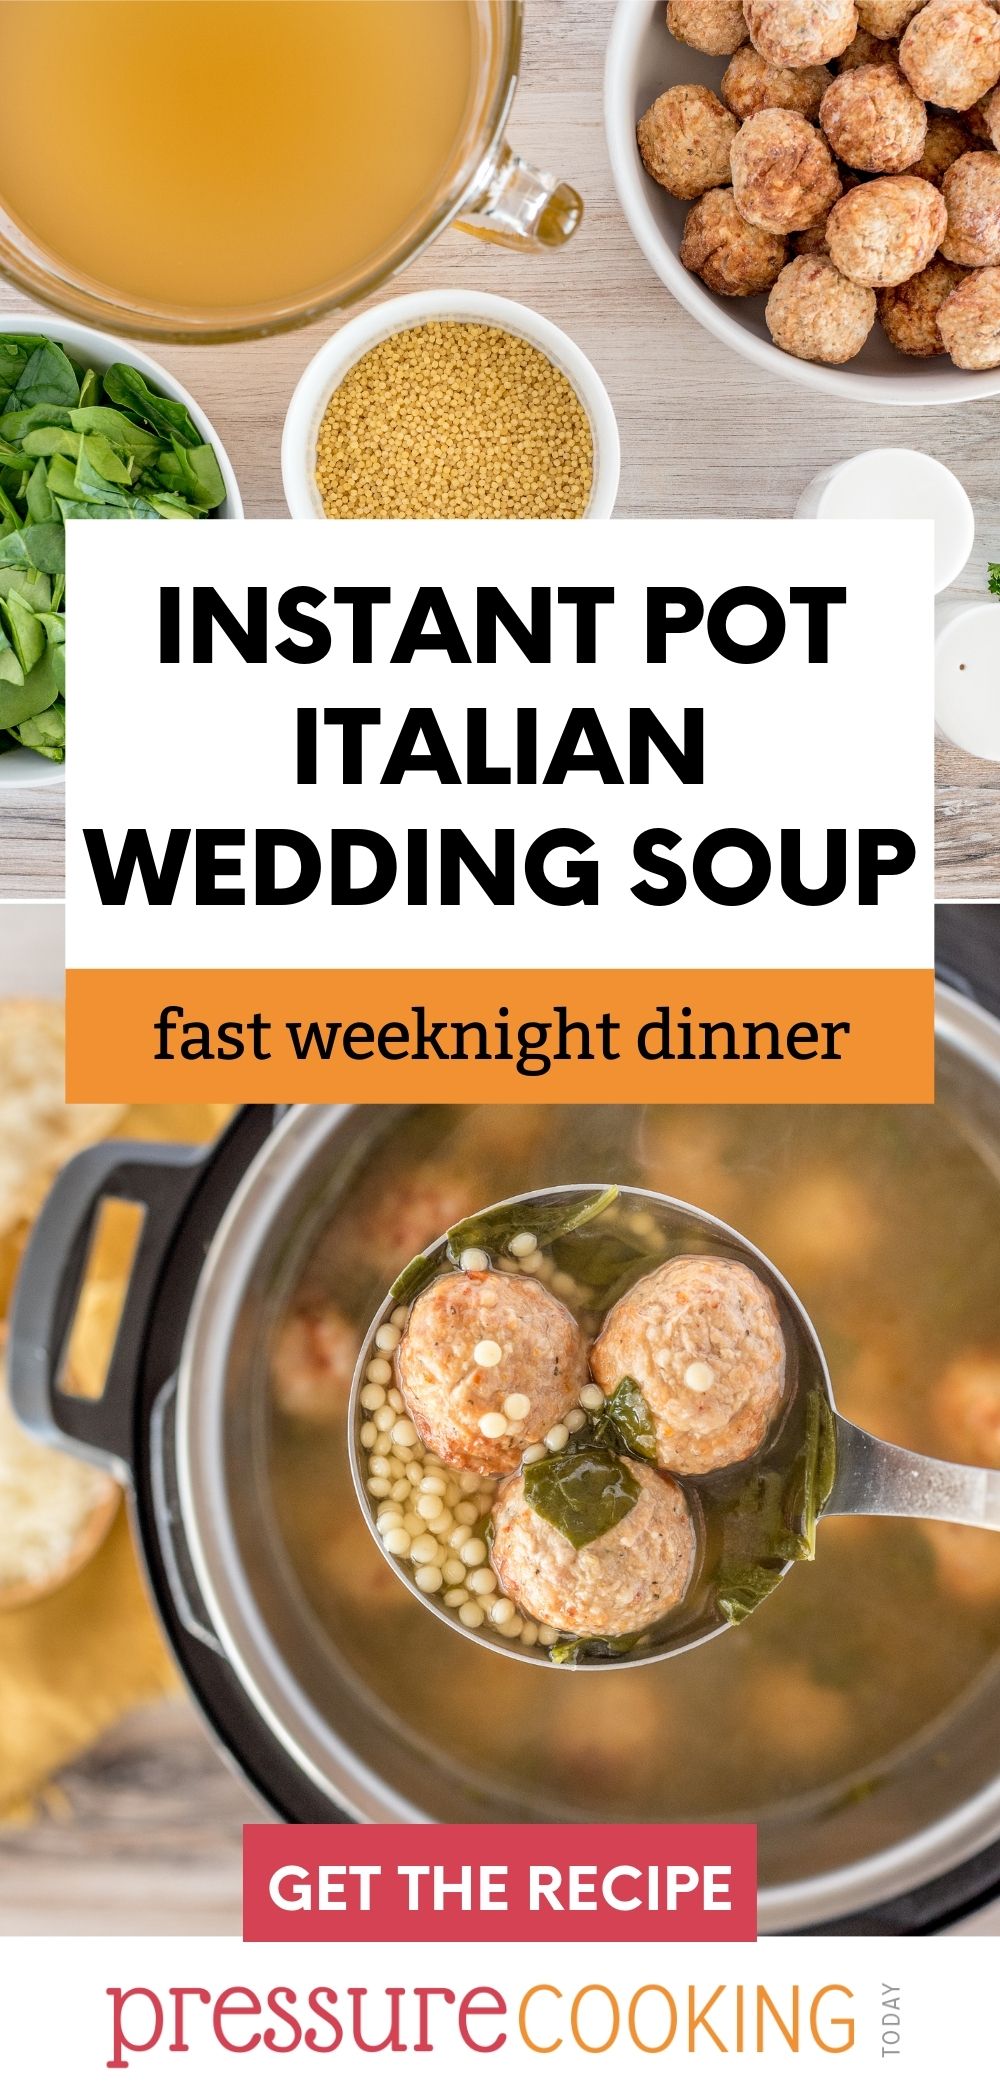 pinterest image that reads "Instant Pot Italian Wedding Soup: Fast weeknight dinner" over two images. The first shows the ingredients for meatball soup and the second shows a silver ladle scooping out the soup with meatballs, spinach, and ancini di pepe via @PressureCook2da